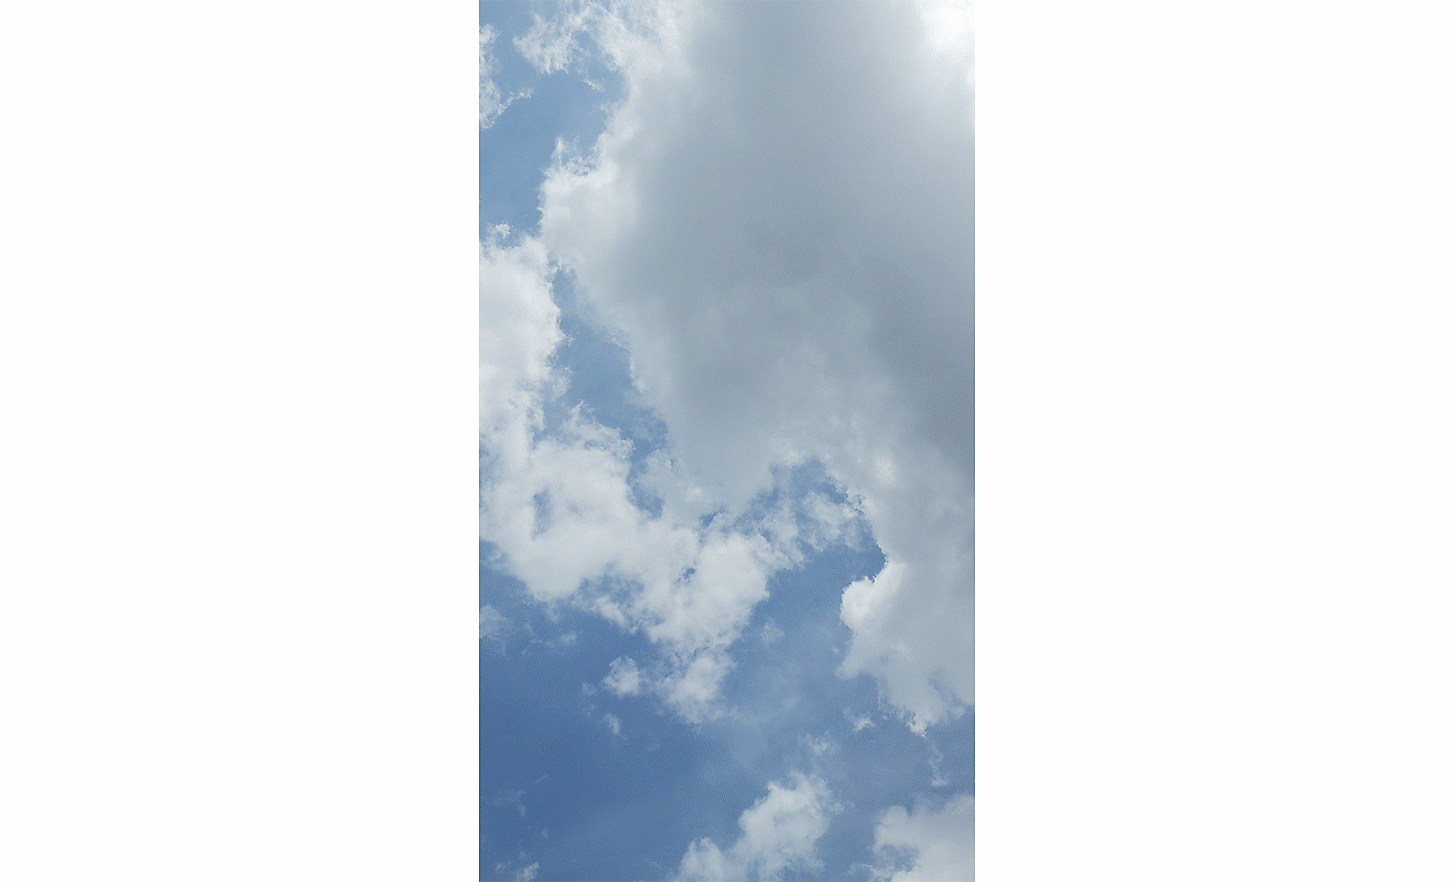 Image of clouds in a blue sky